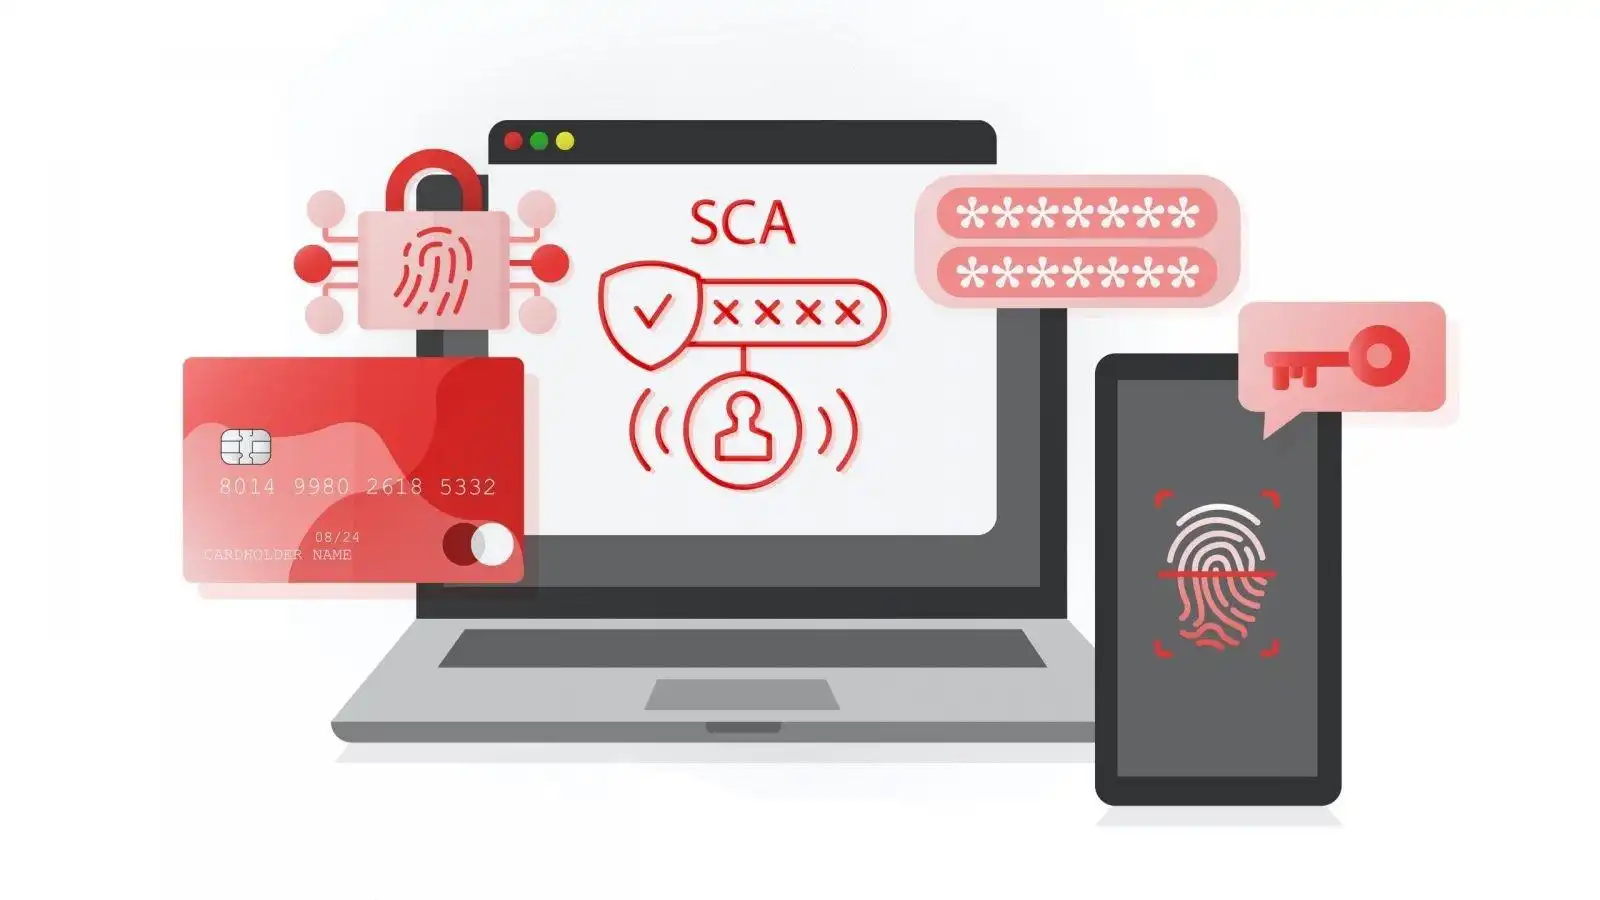 Implementing Strong Authentication (SCA)